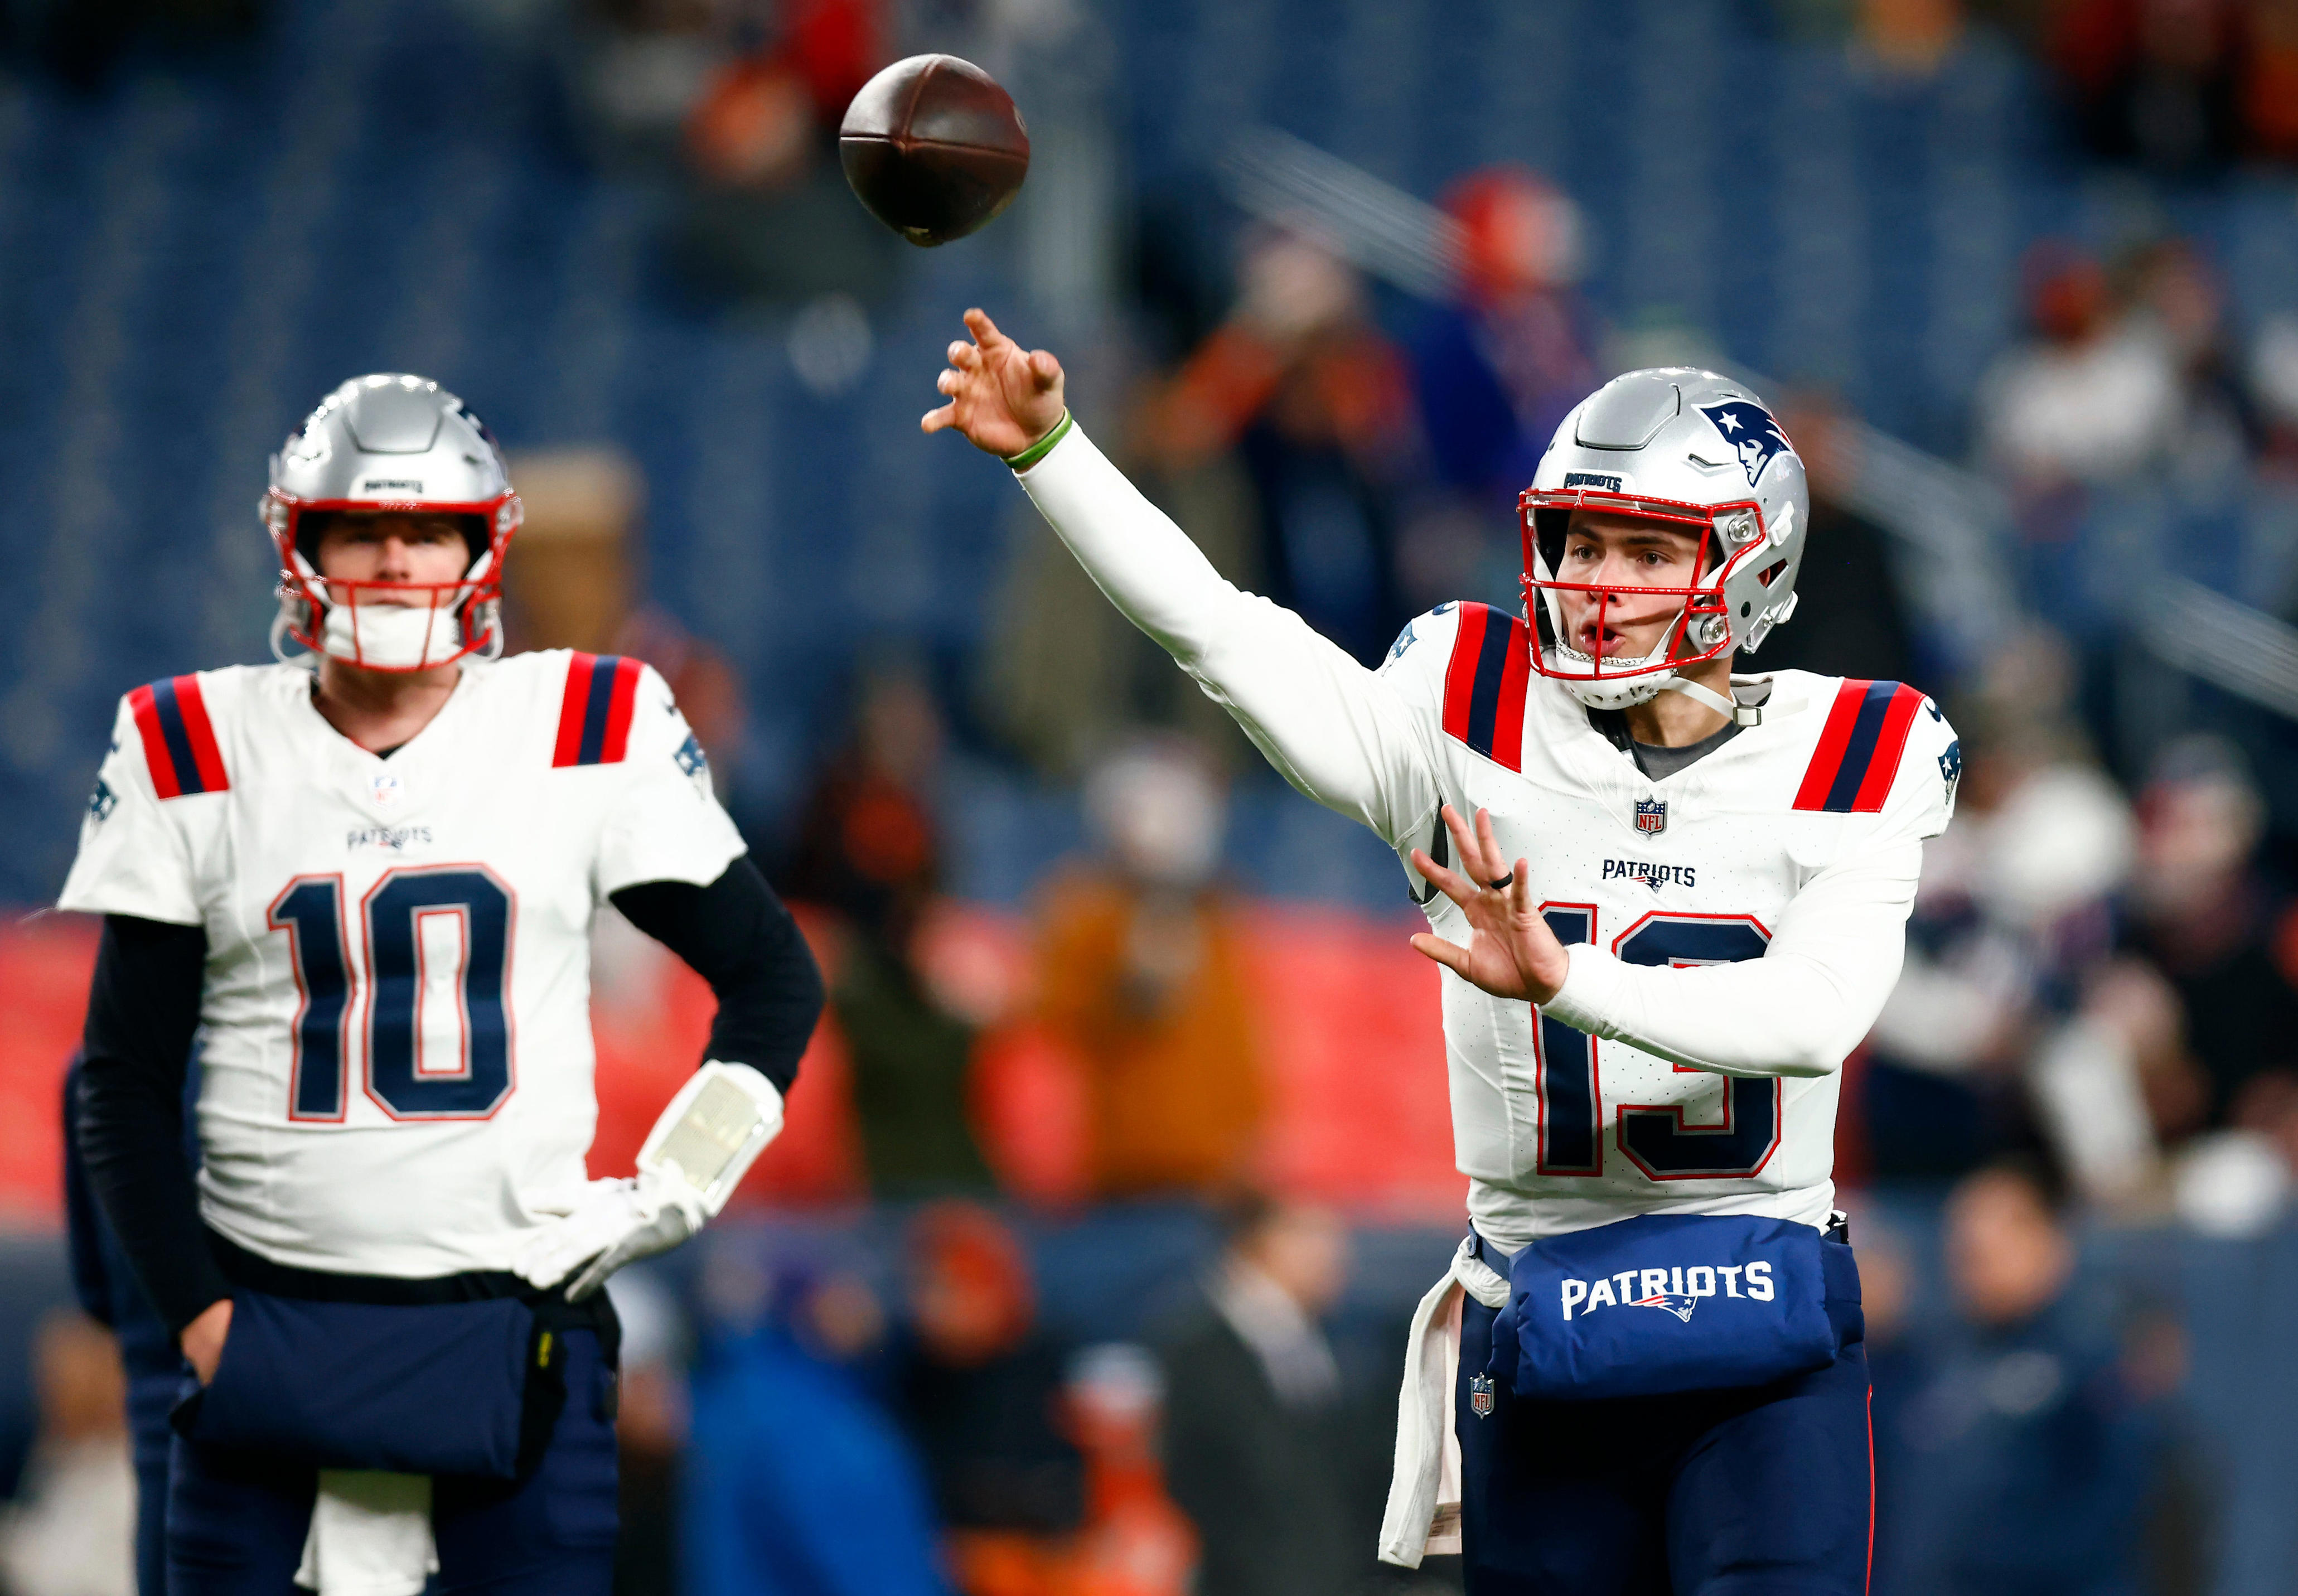 report: former patriots qb nathan rourke had multiple waiver claims